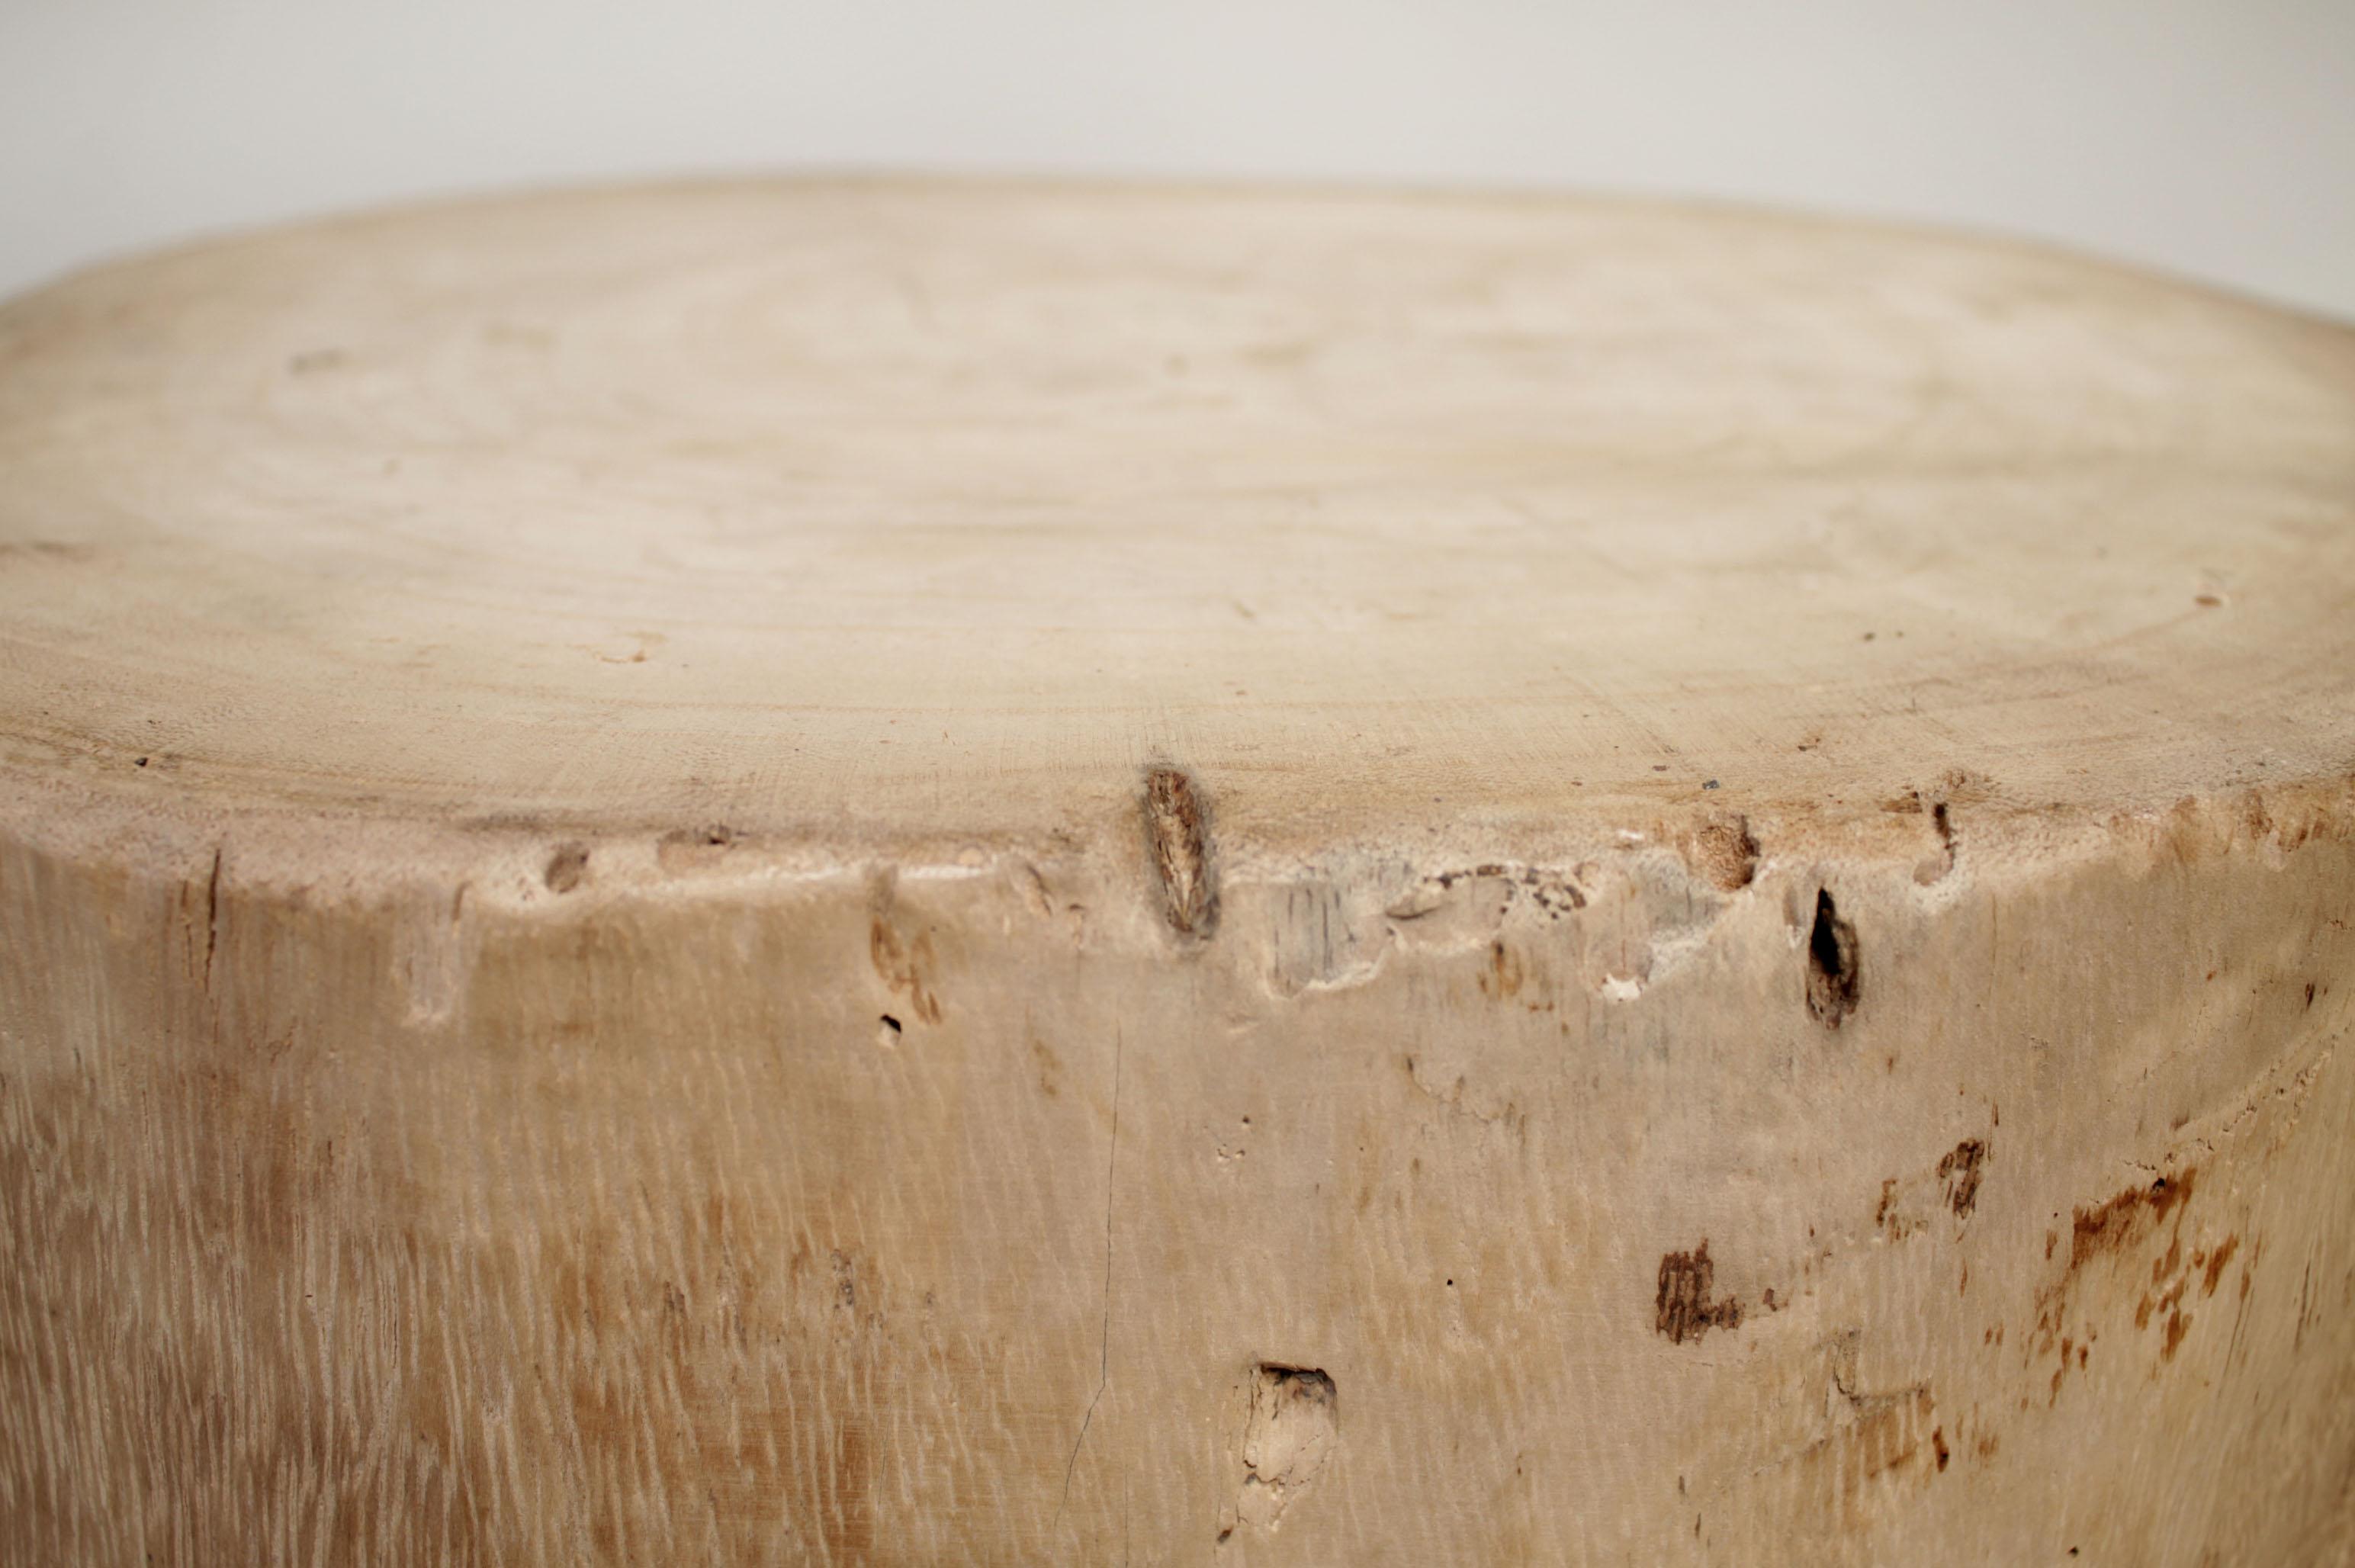 Birch Wood Tree Stump Base for Side Table or Stool 1